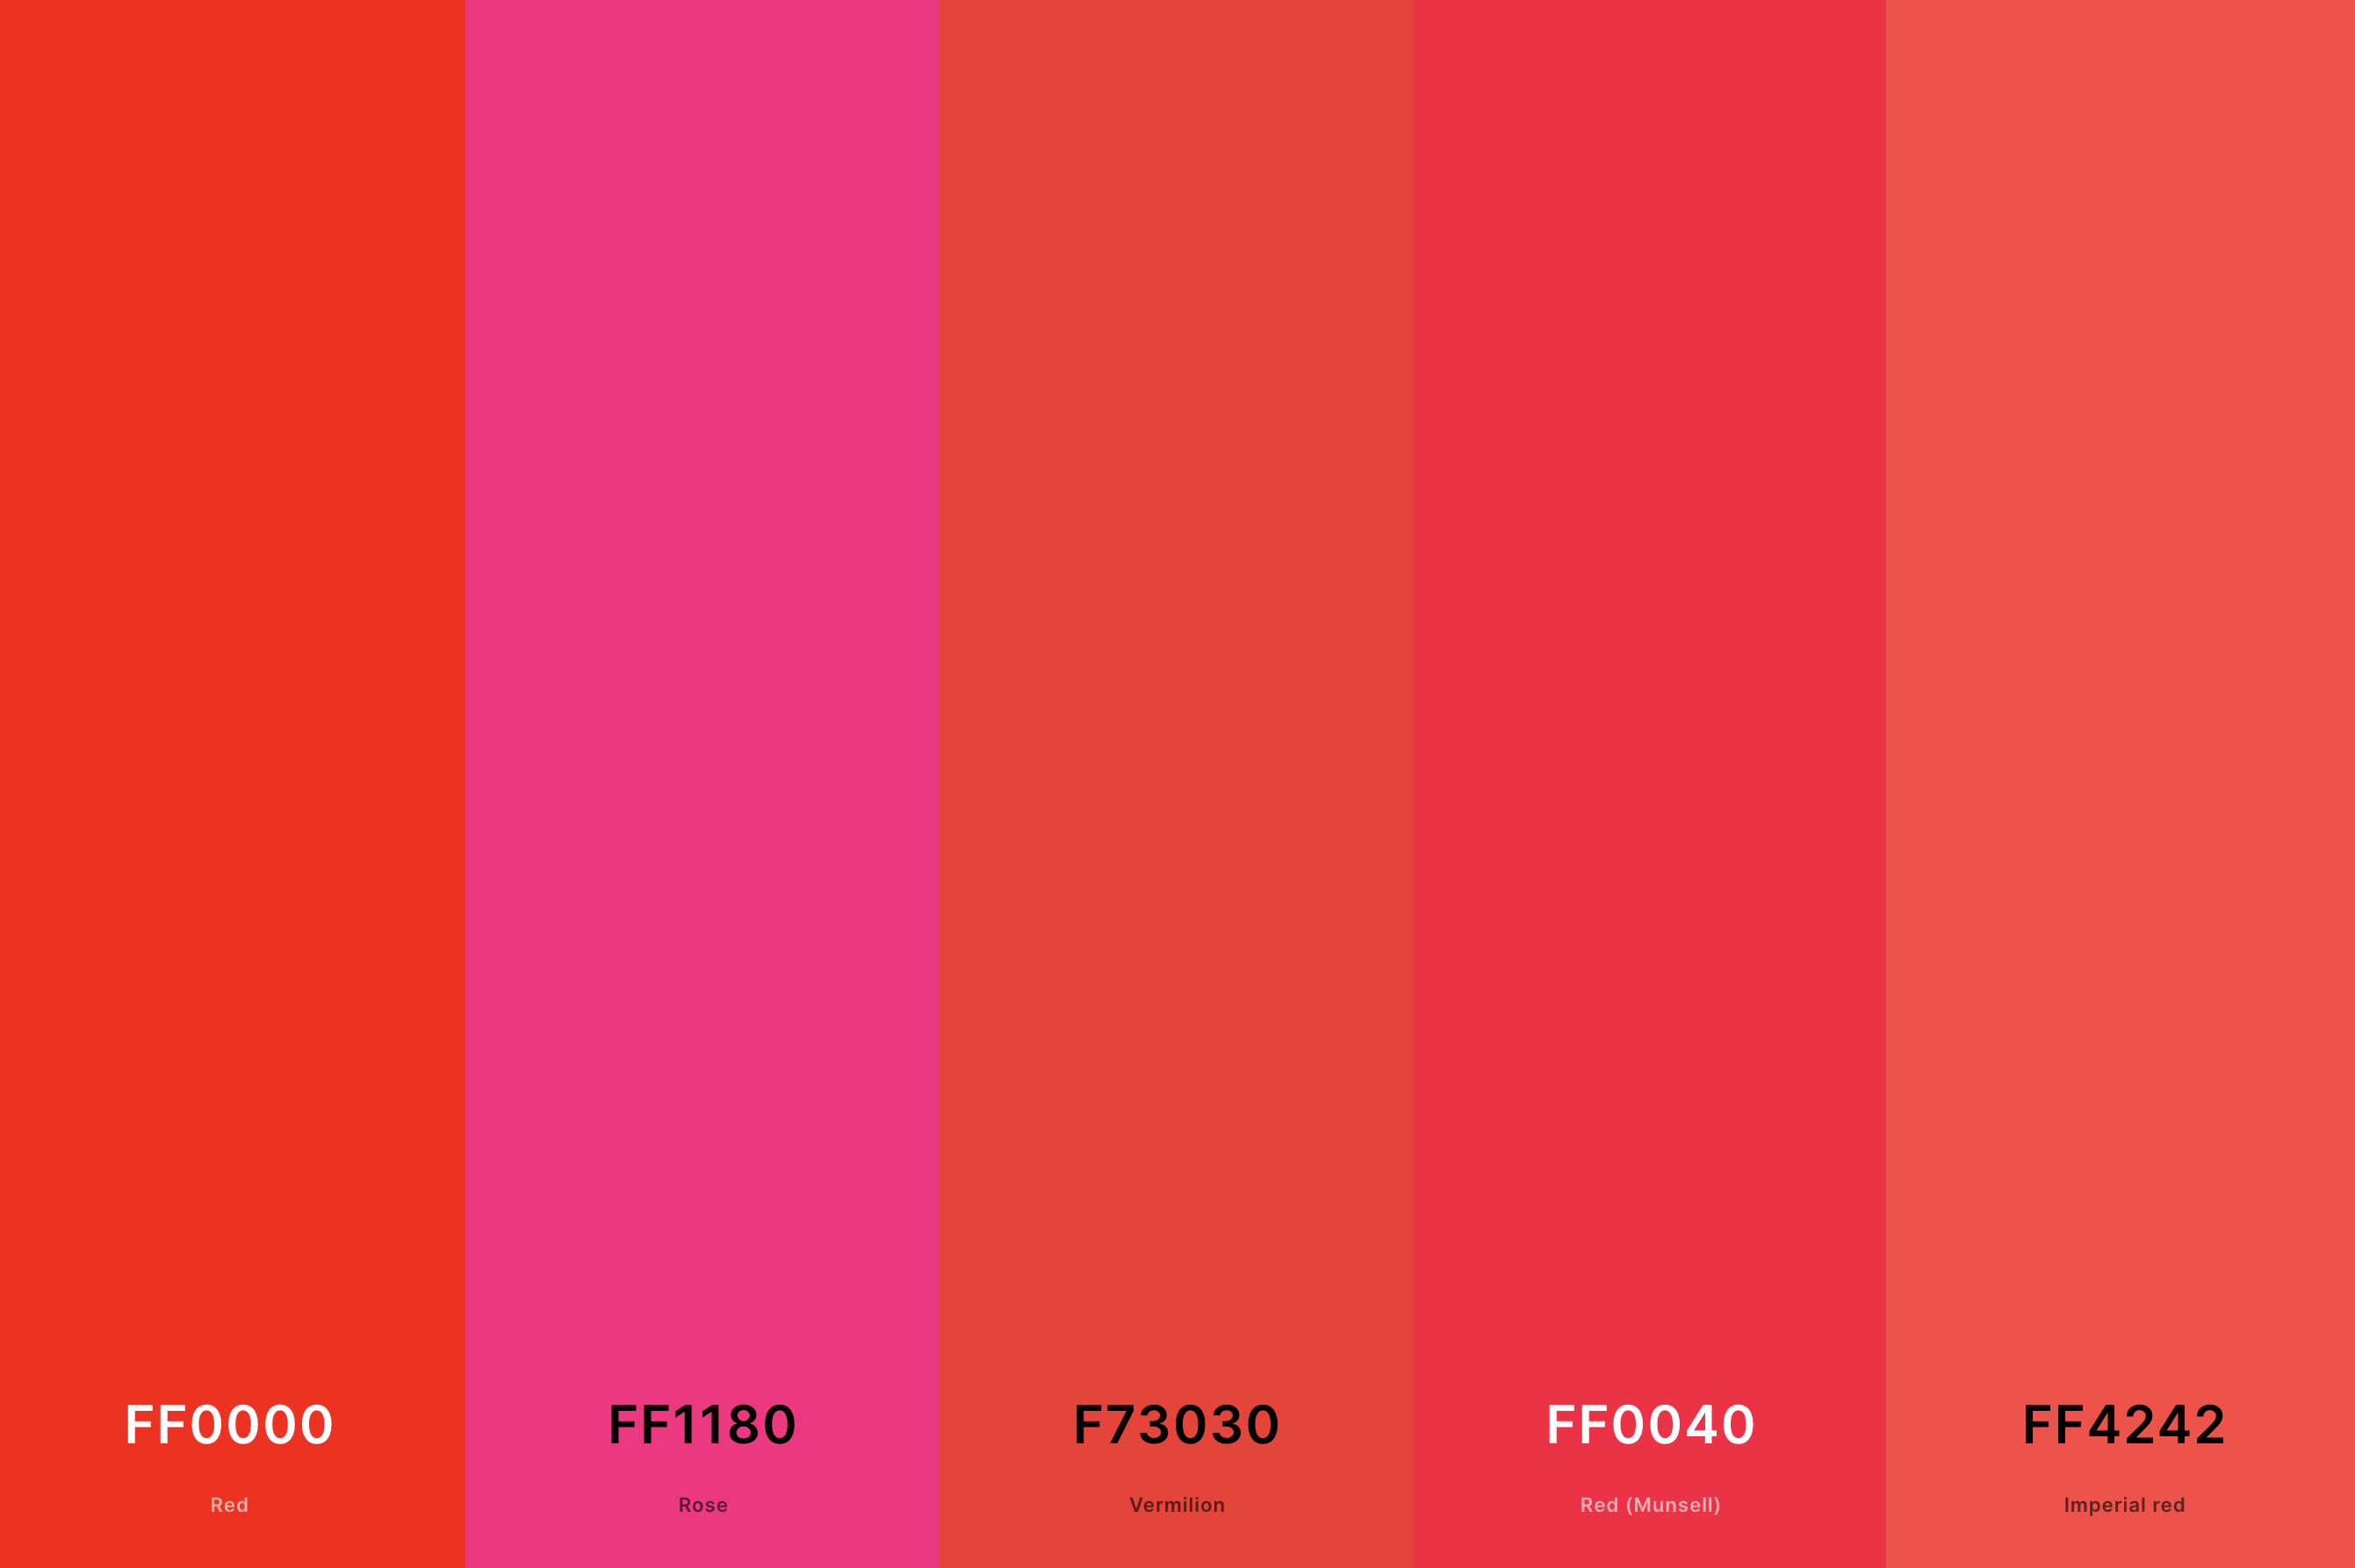 13. Neon Red Color Palette Color Palette with Red (Hex #FF0000) + Rose (Hex #FF1180) + Vermilion (Hex #F73030) + Red (Munsell) (Hex #FF0040) + Imperial Red (Hex #FF4242) Color Palette with Hex Codes